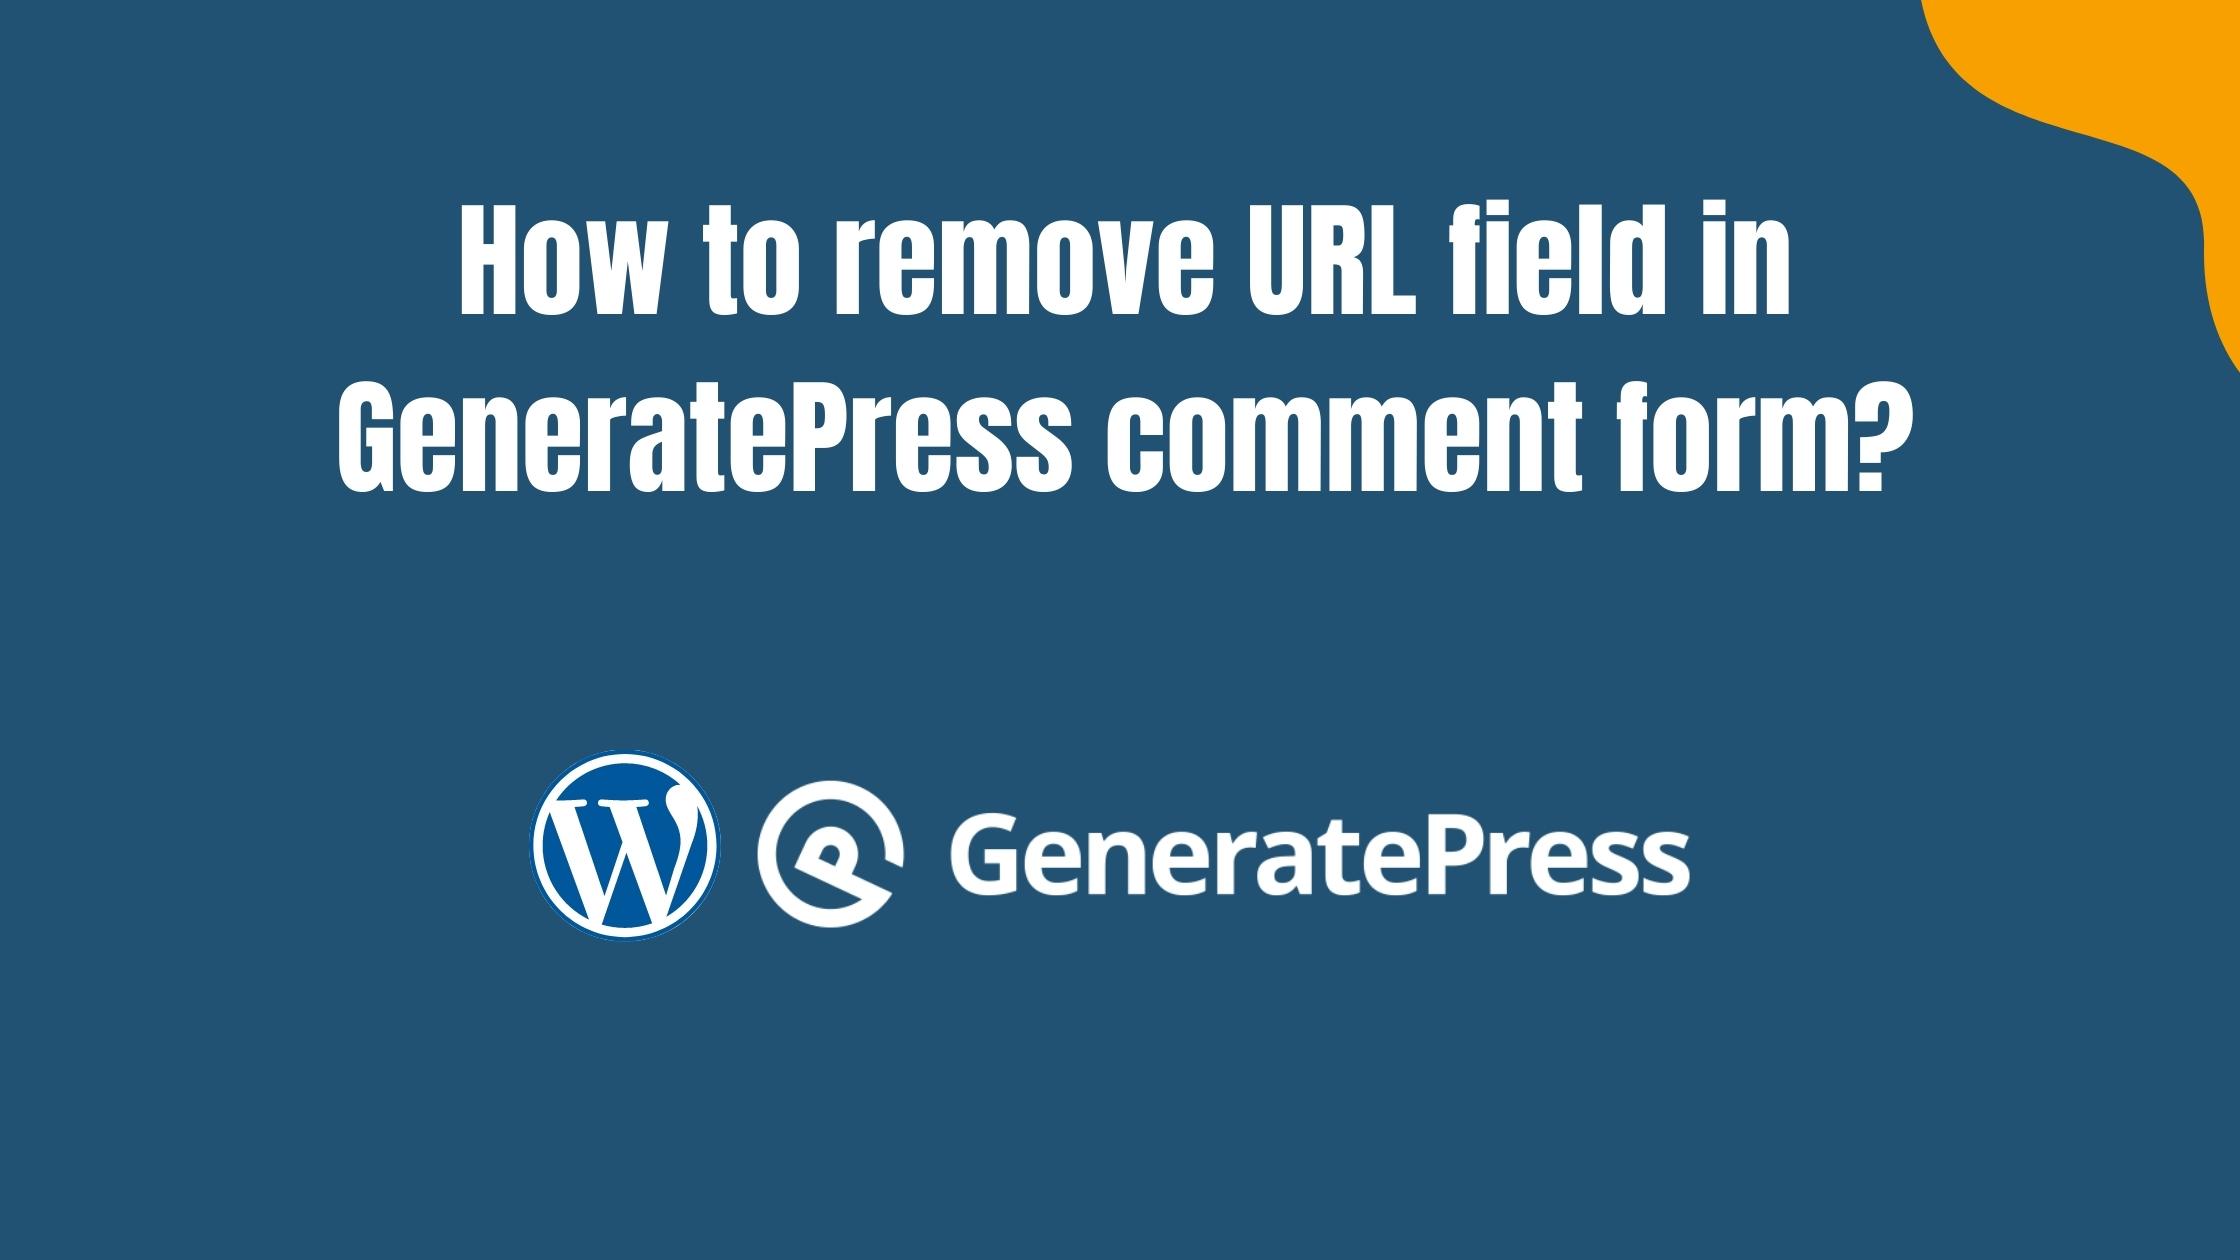 How to remove URL field in GeneratePress comment form